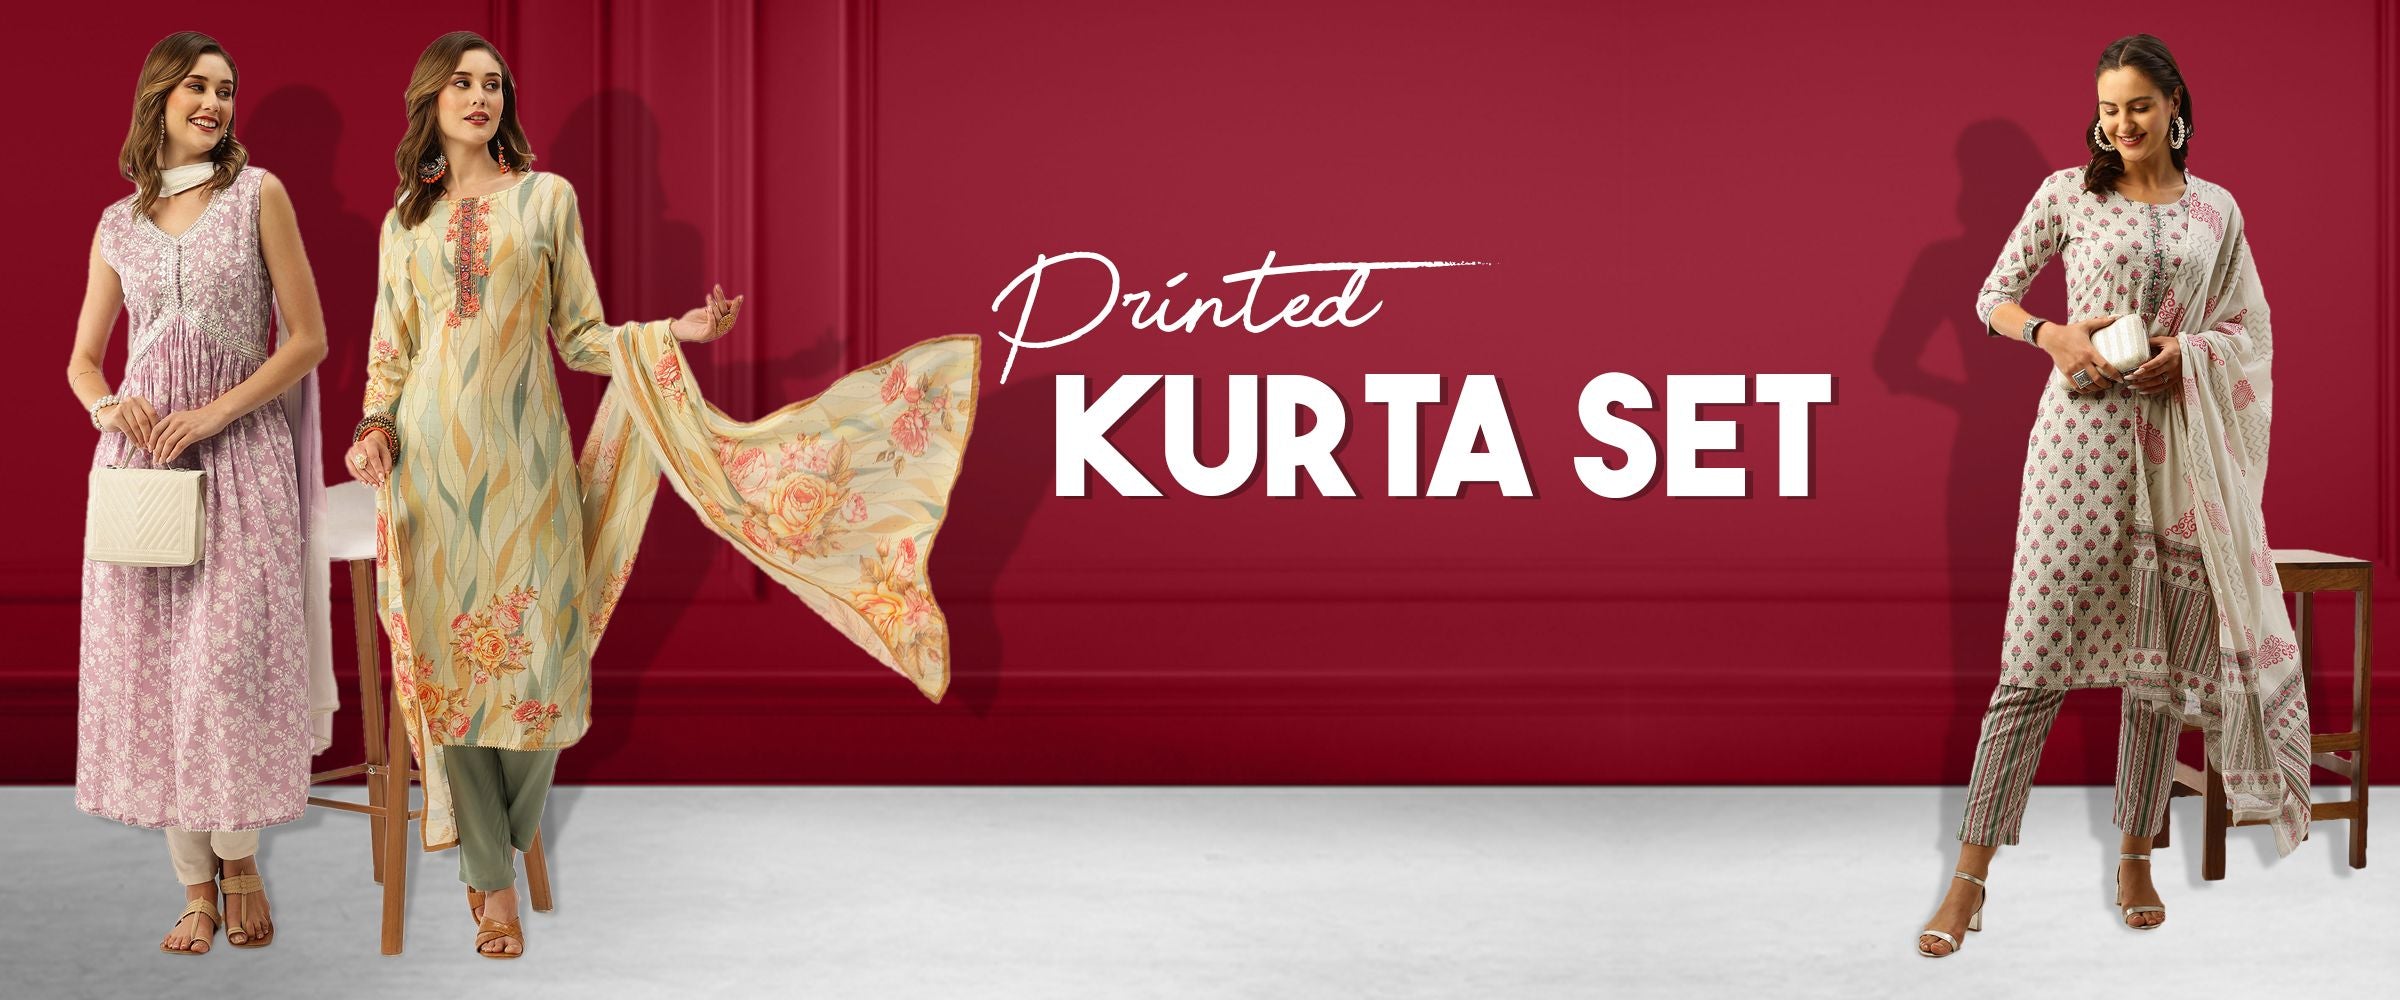 Elevate Your Style: Kurti Set with Dupatta for a Trendy Look